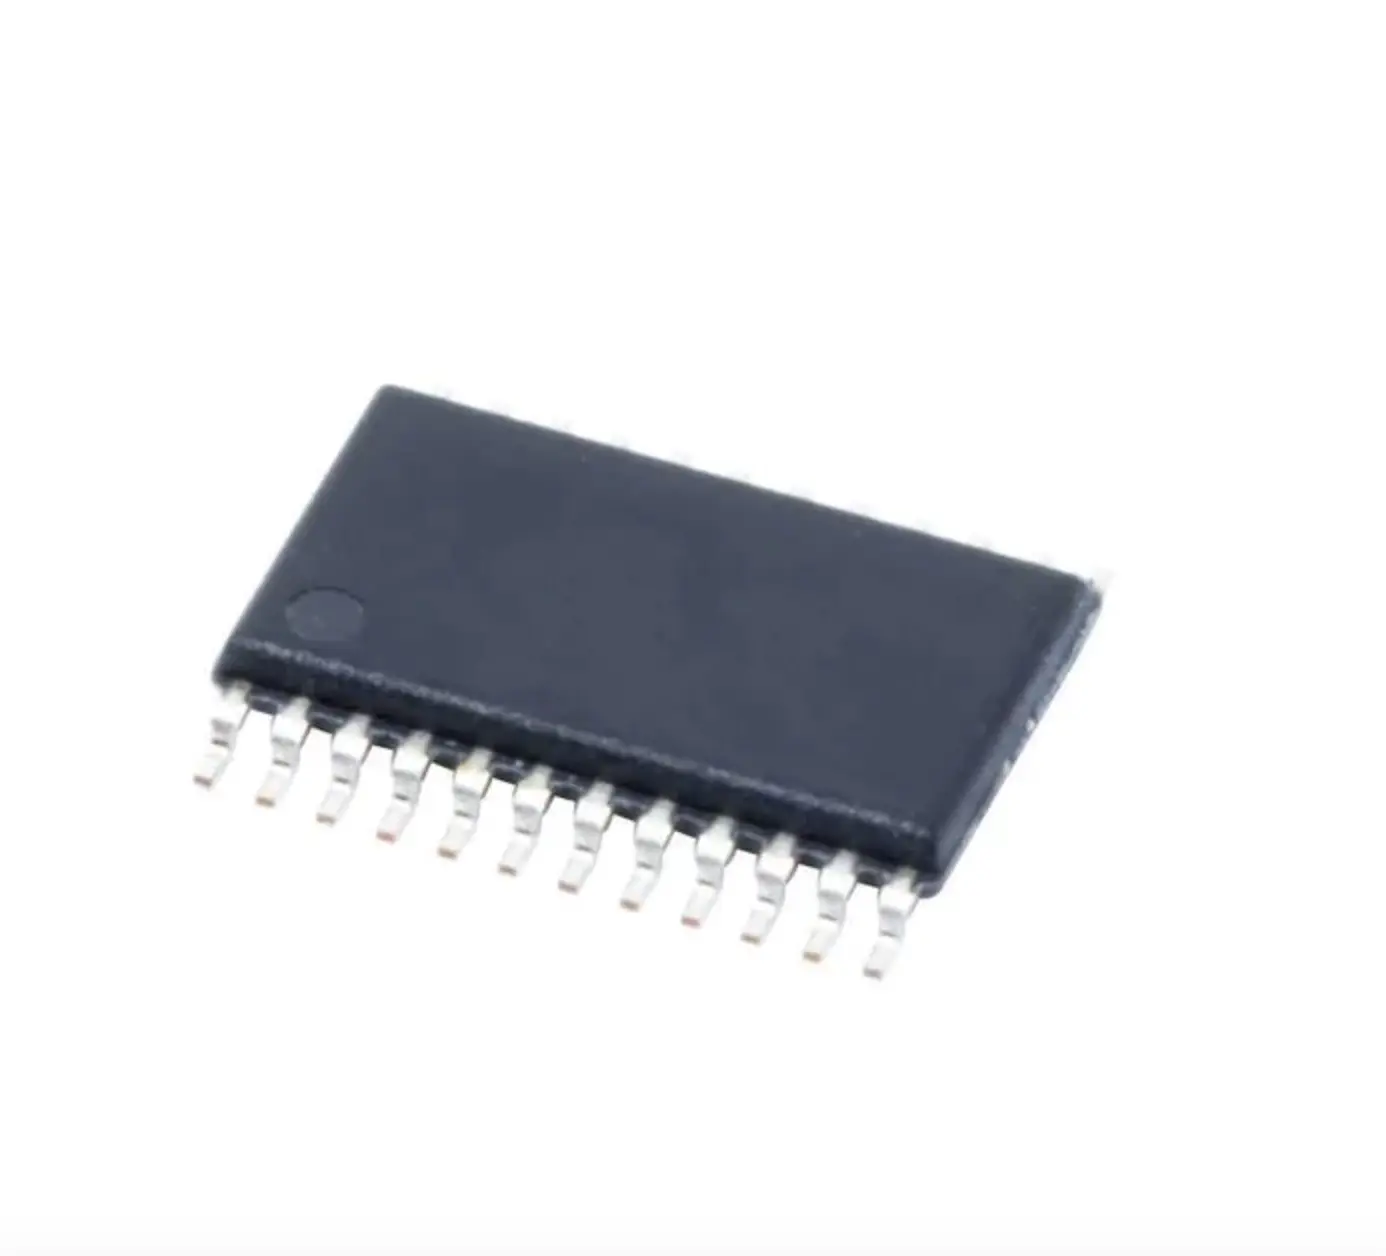 CC1050PWR Single Chip Ultra Low Power for the 315/433/868/915 MHz SRD Band 24-TSSOP -40 to 85